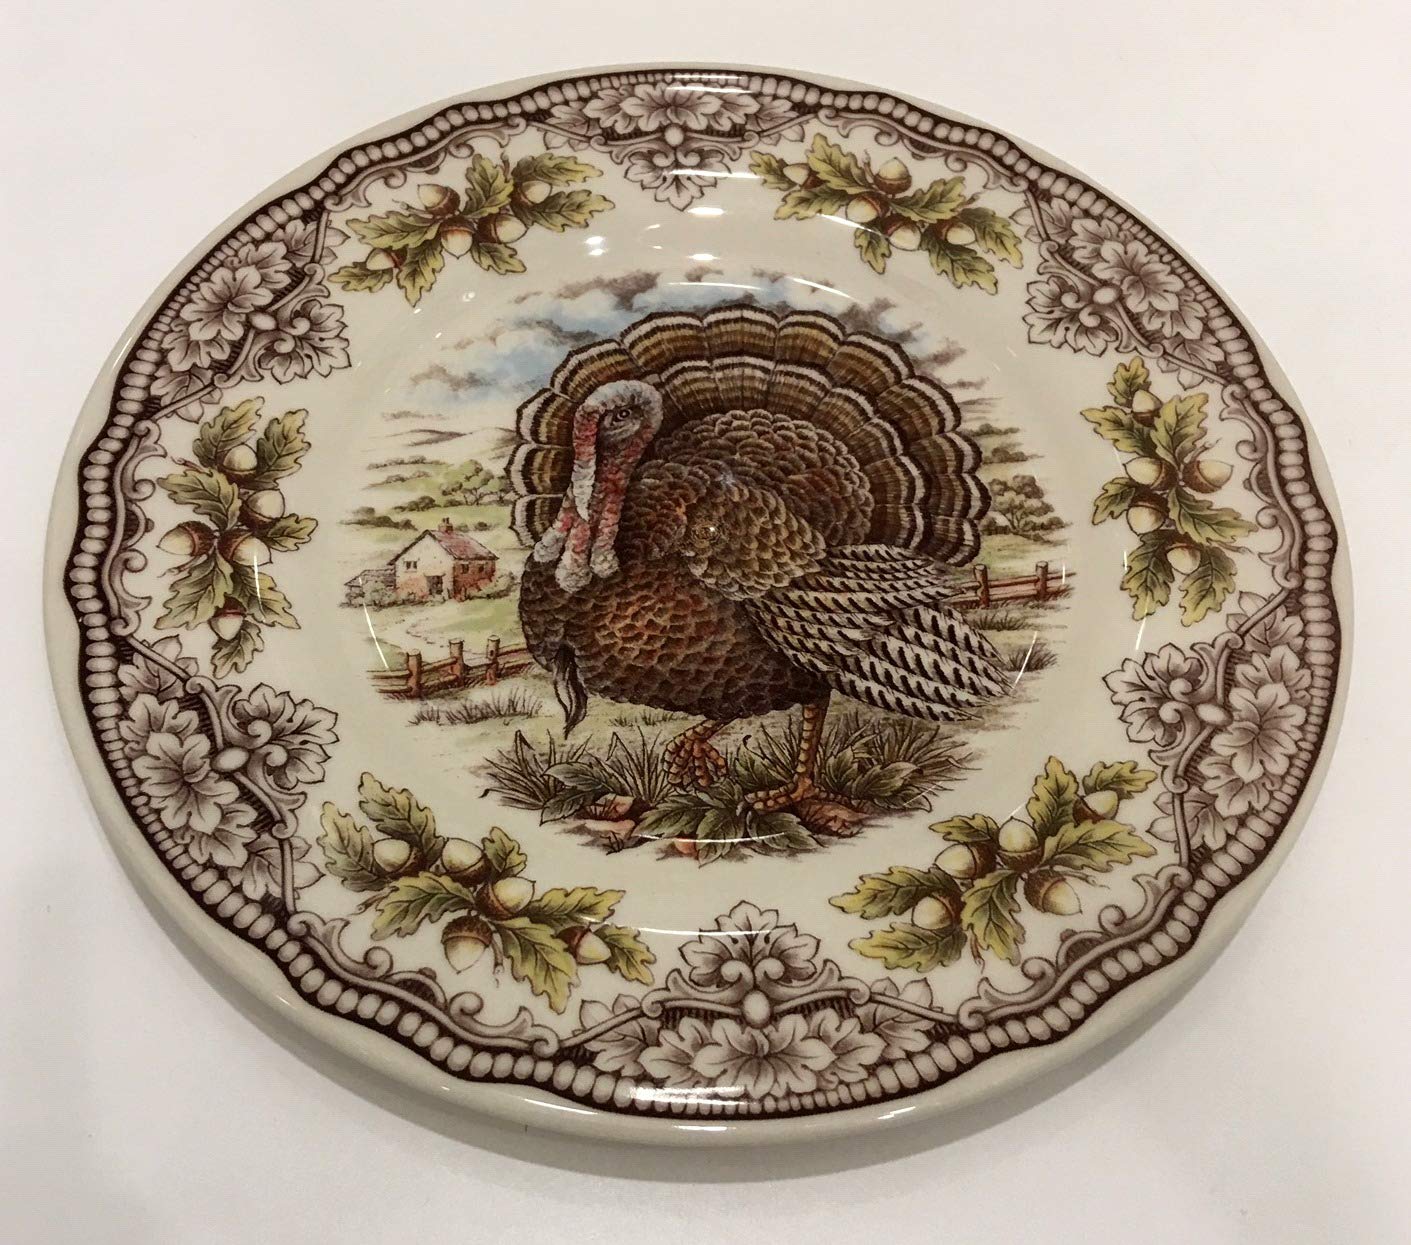 Victorian English Pottery Turkey Thanksgiving Salad Plate (1) Replacement Piece Approx 85